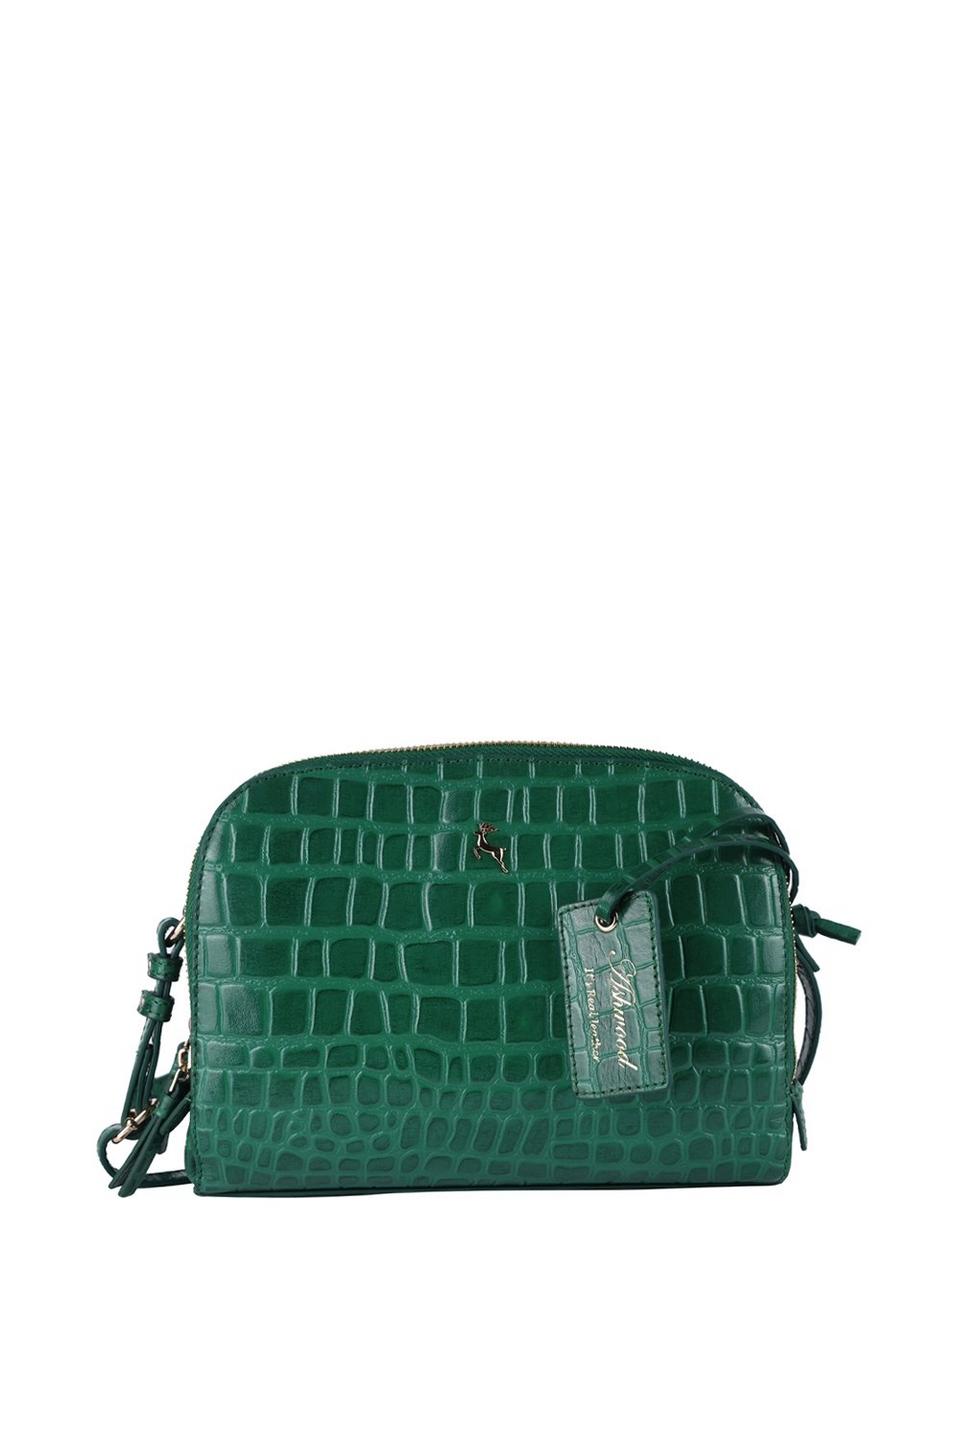 Bags & Purses  'Classy' Croc Embossed Leather Three Section Cross